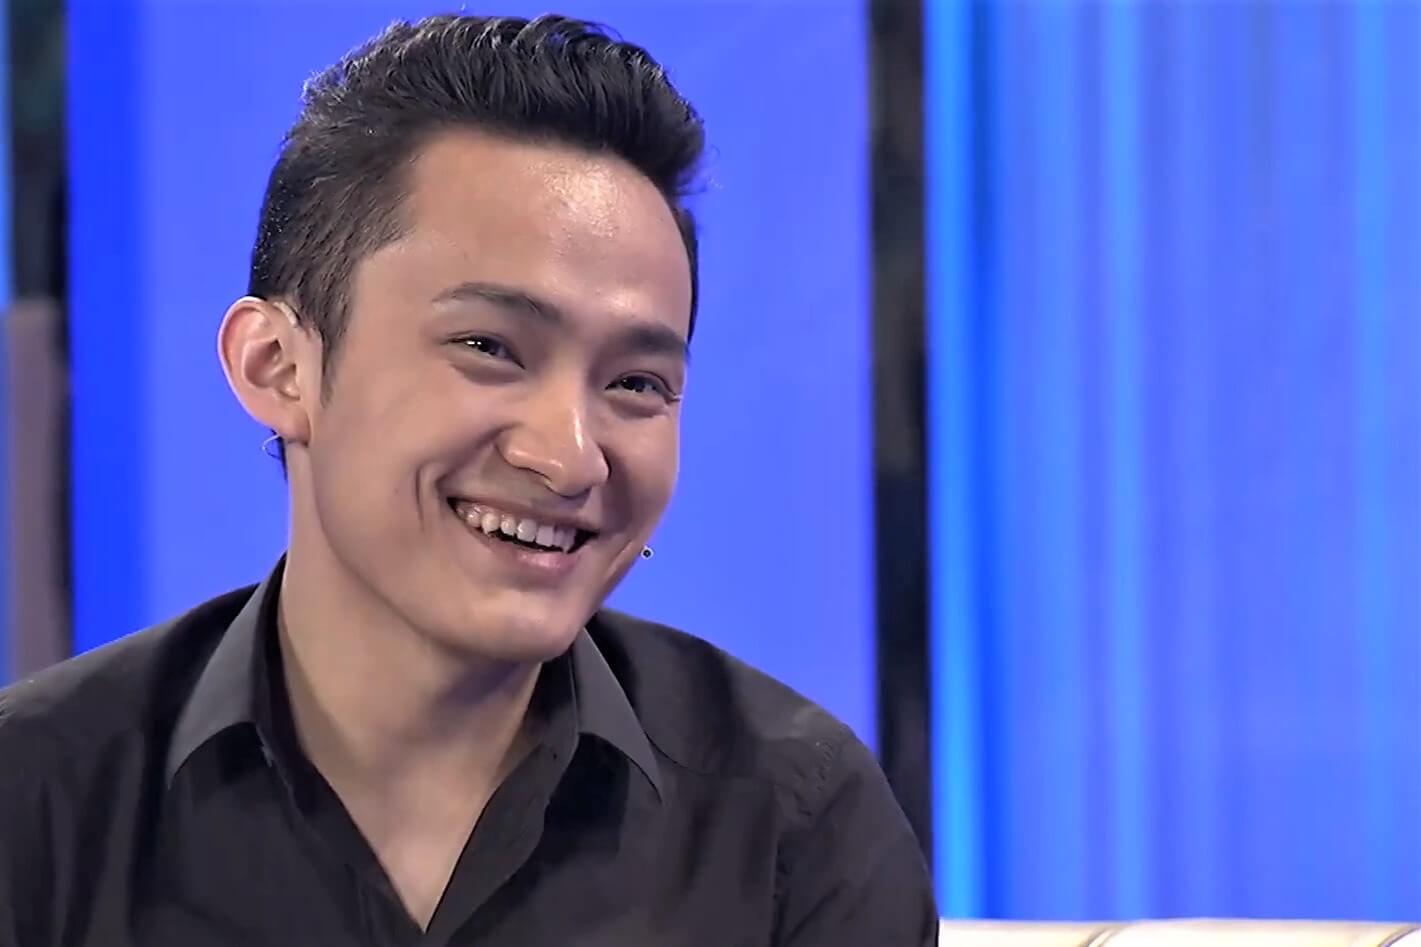 Tron founder, Justin Sun, believes that crypto will return to China